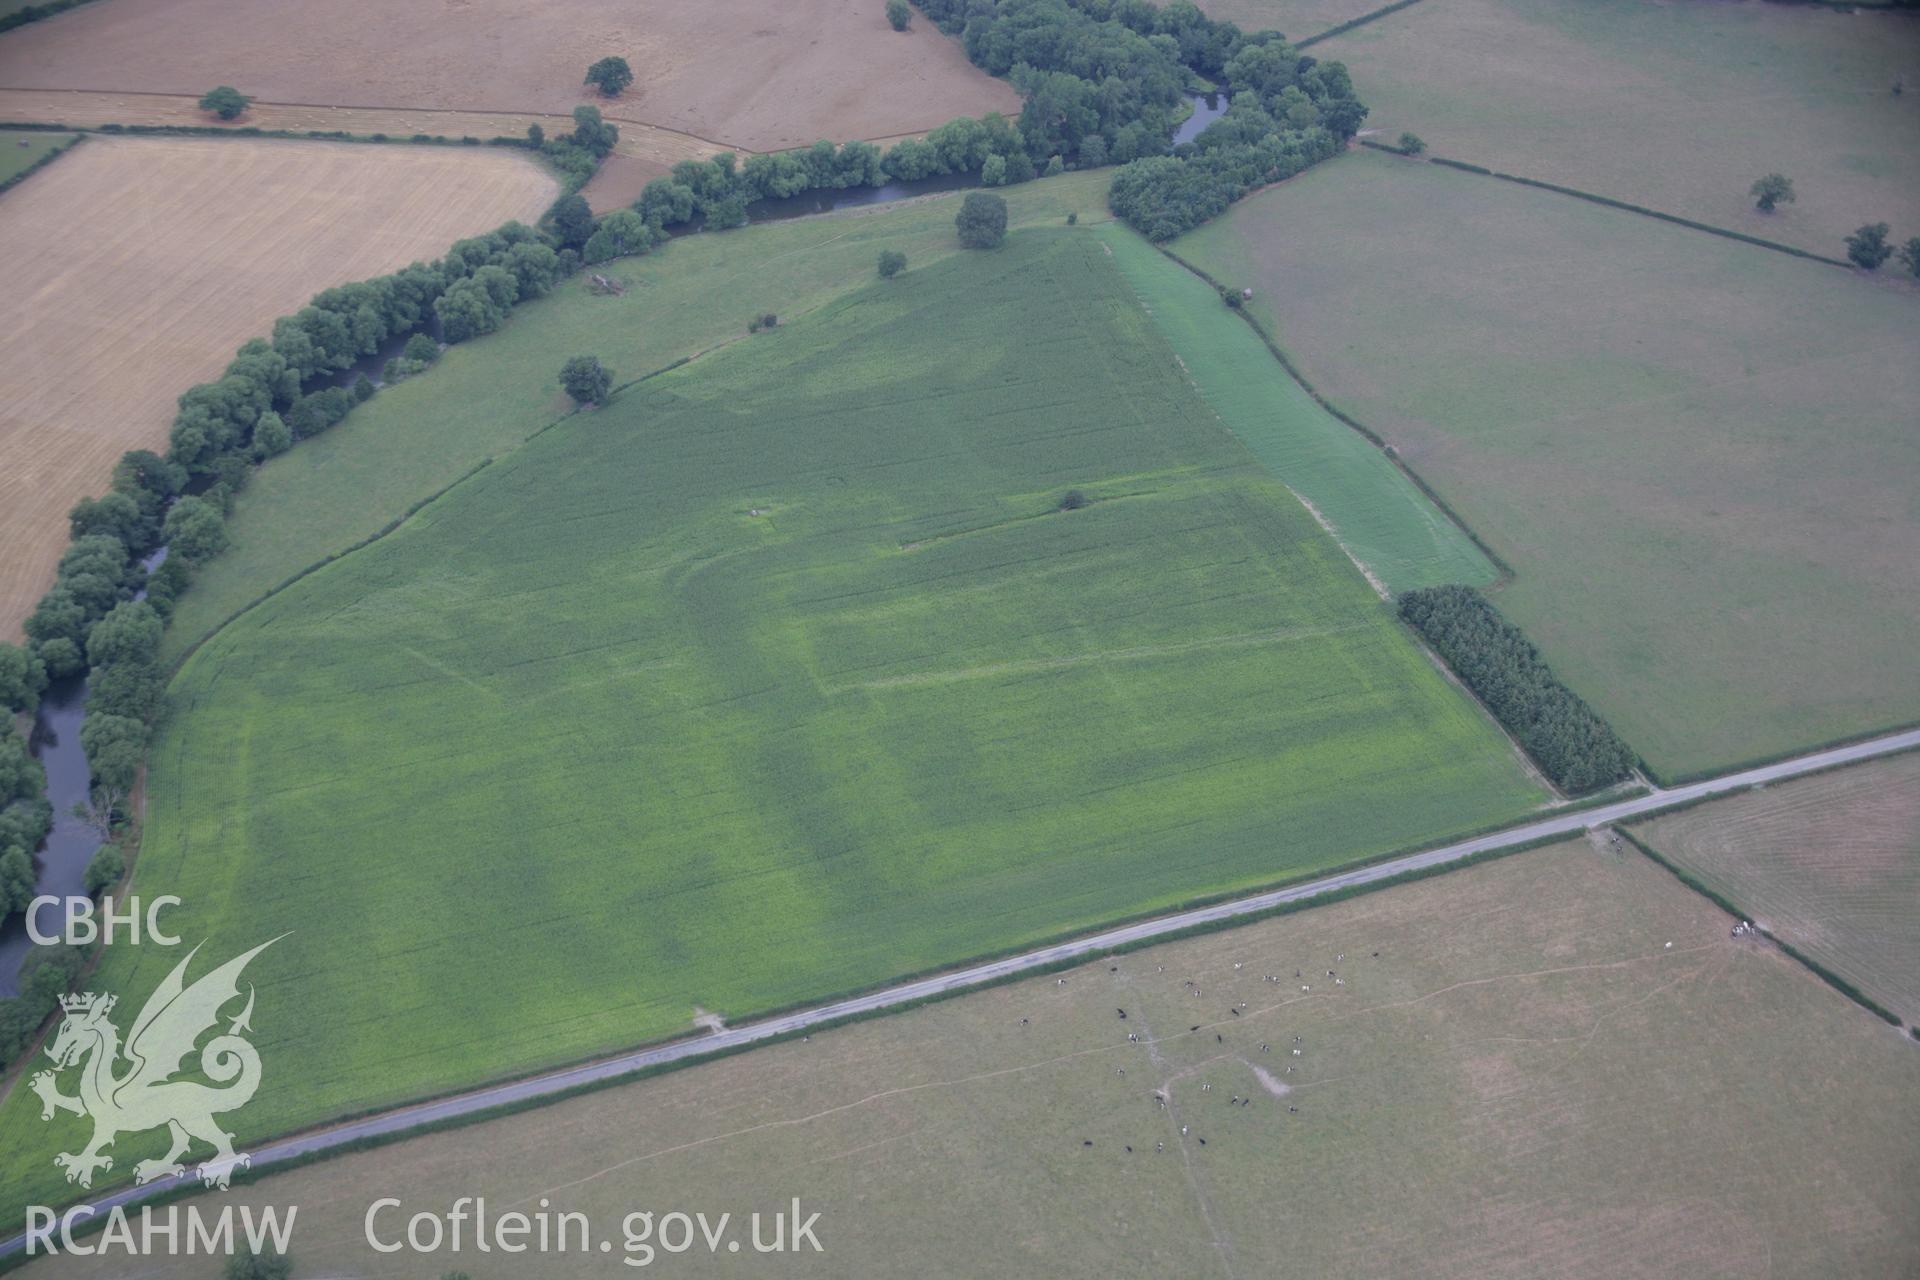 RCAHMW colour oblique aerial photograph of Forden Gaer Roman Settlement showing cropmarks. Taken on 14 August 2006 by Toby Driver.